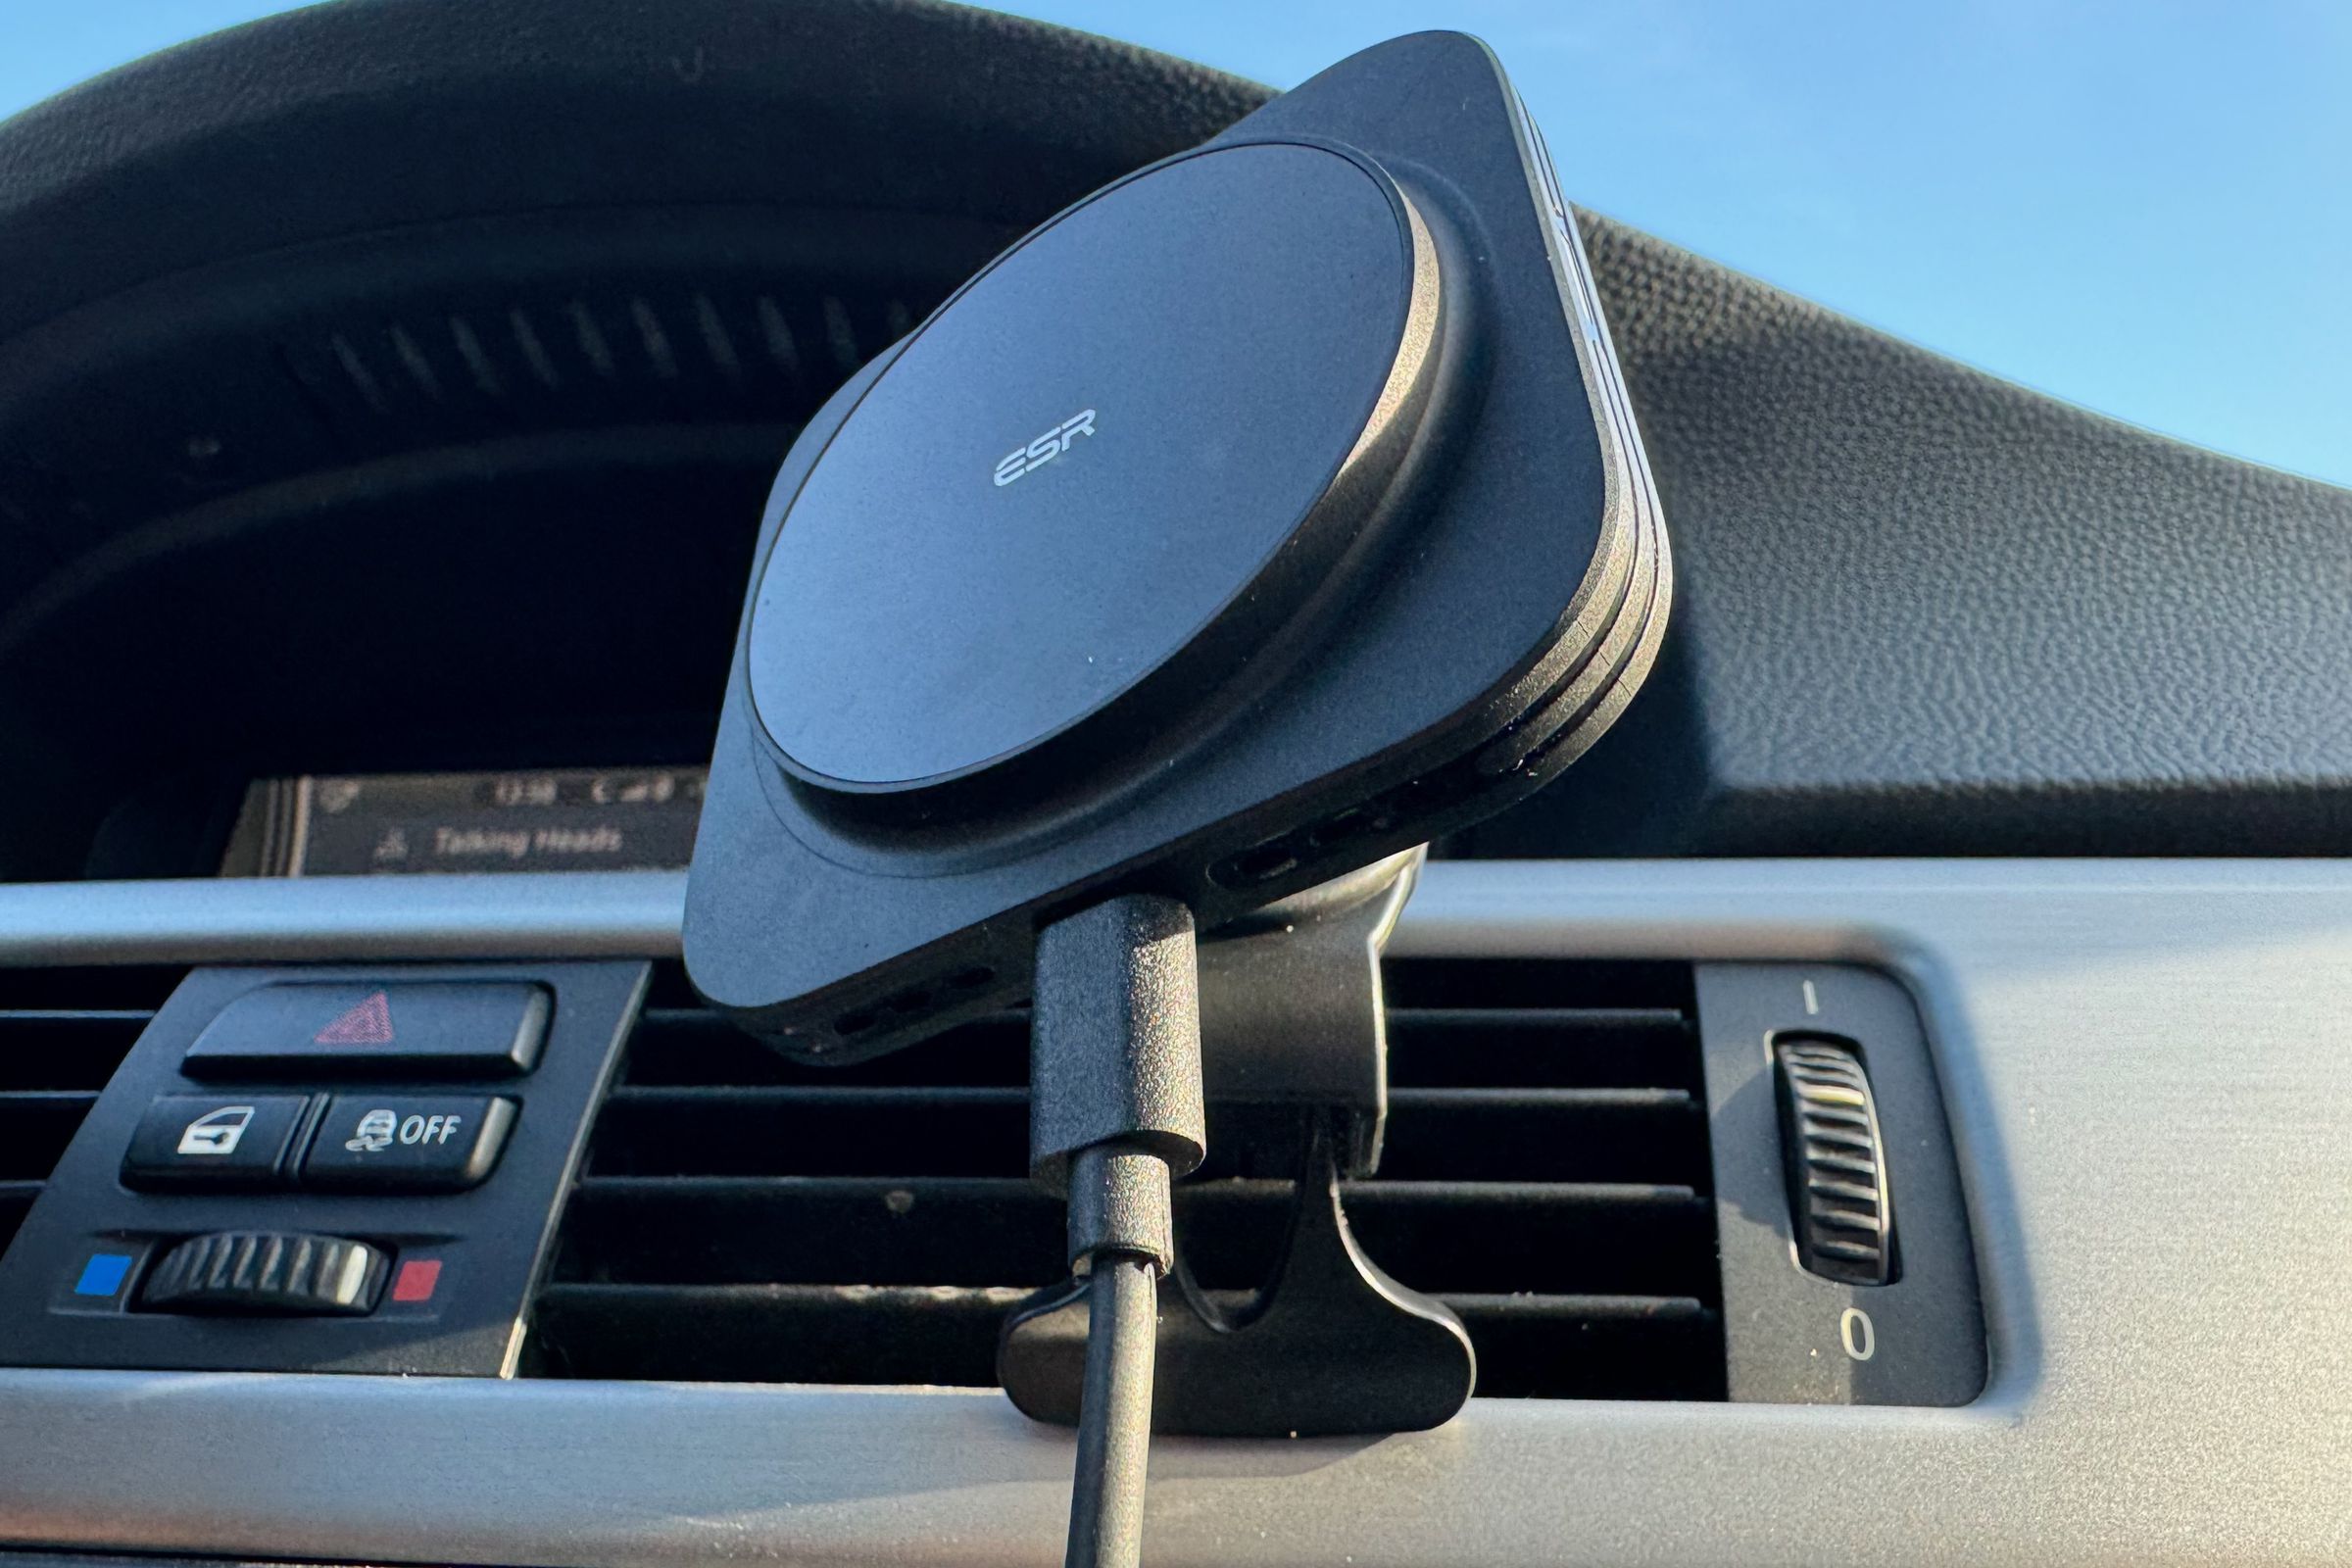 A black plastic car charging mount with the ESR logo at the center of the circular charging puck is mounted to a car’s vent.